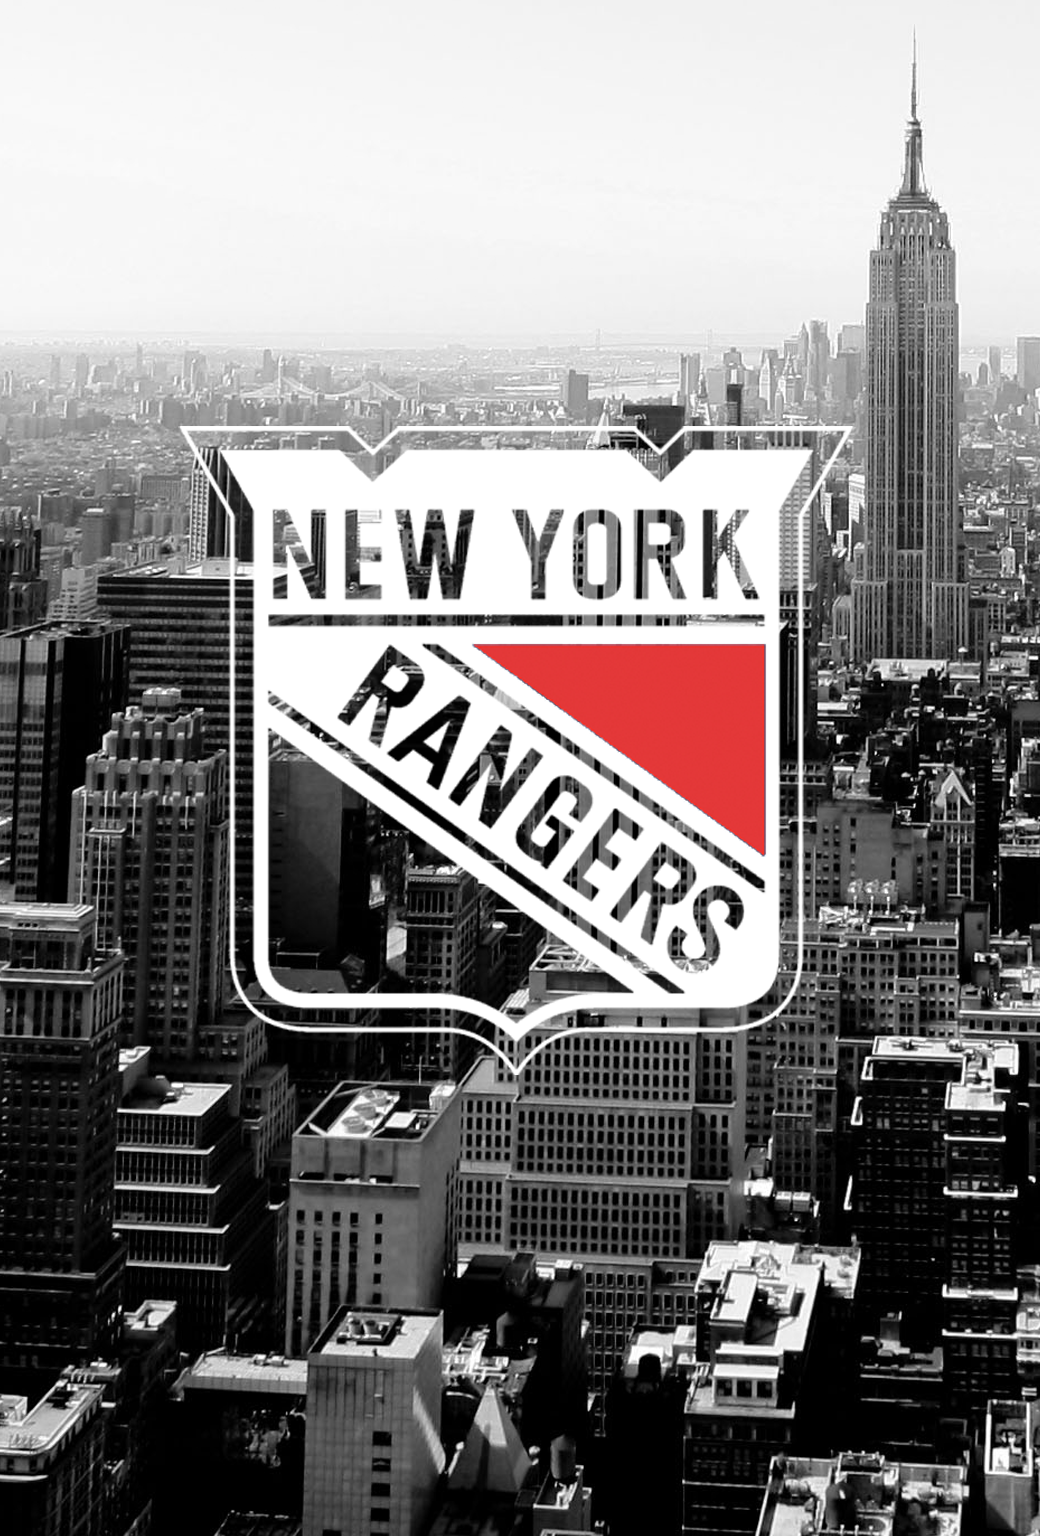 New York Rangers NYC skyline mobile wallpaper iPhone 4 or iPhone 5s